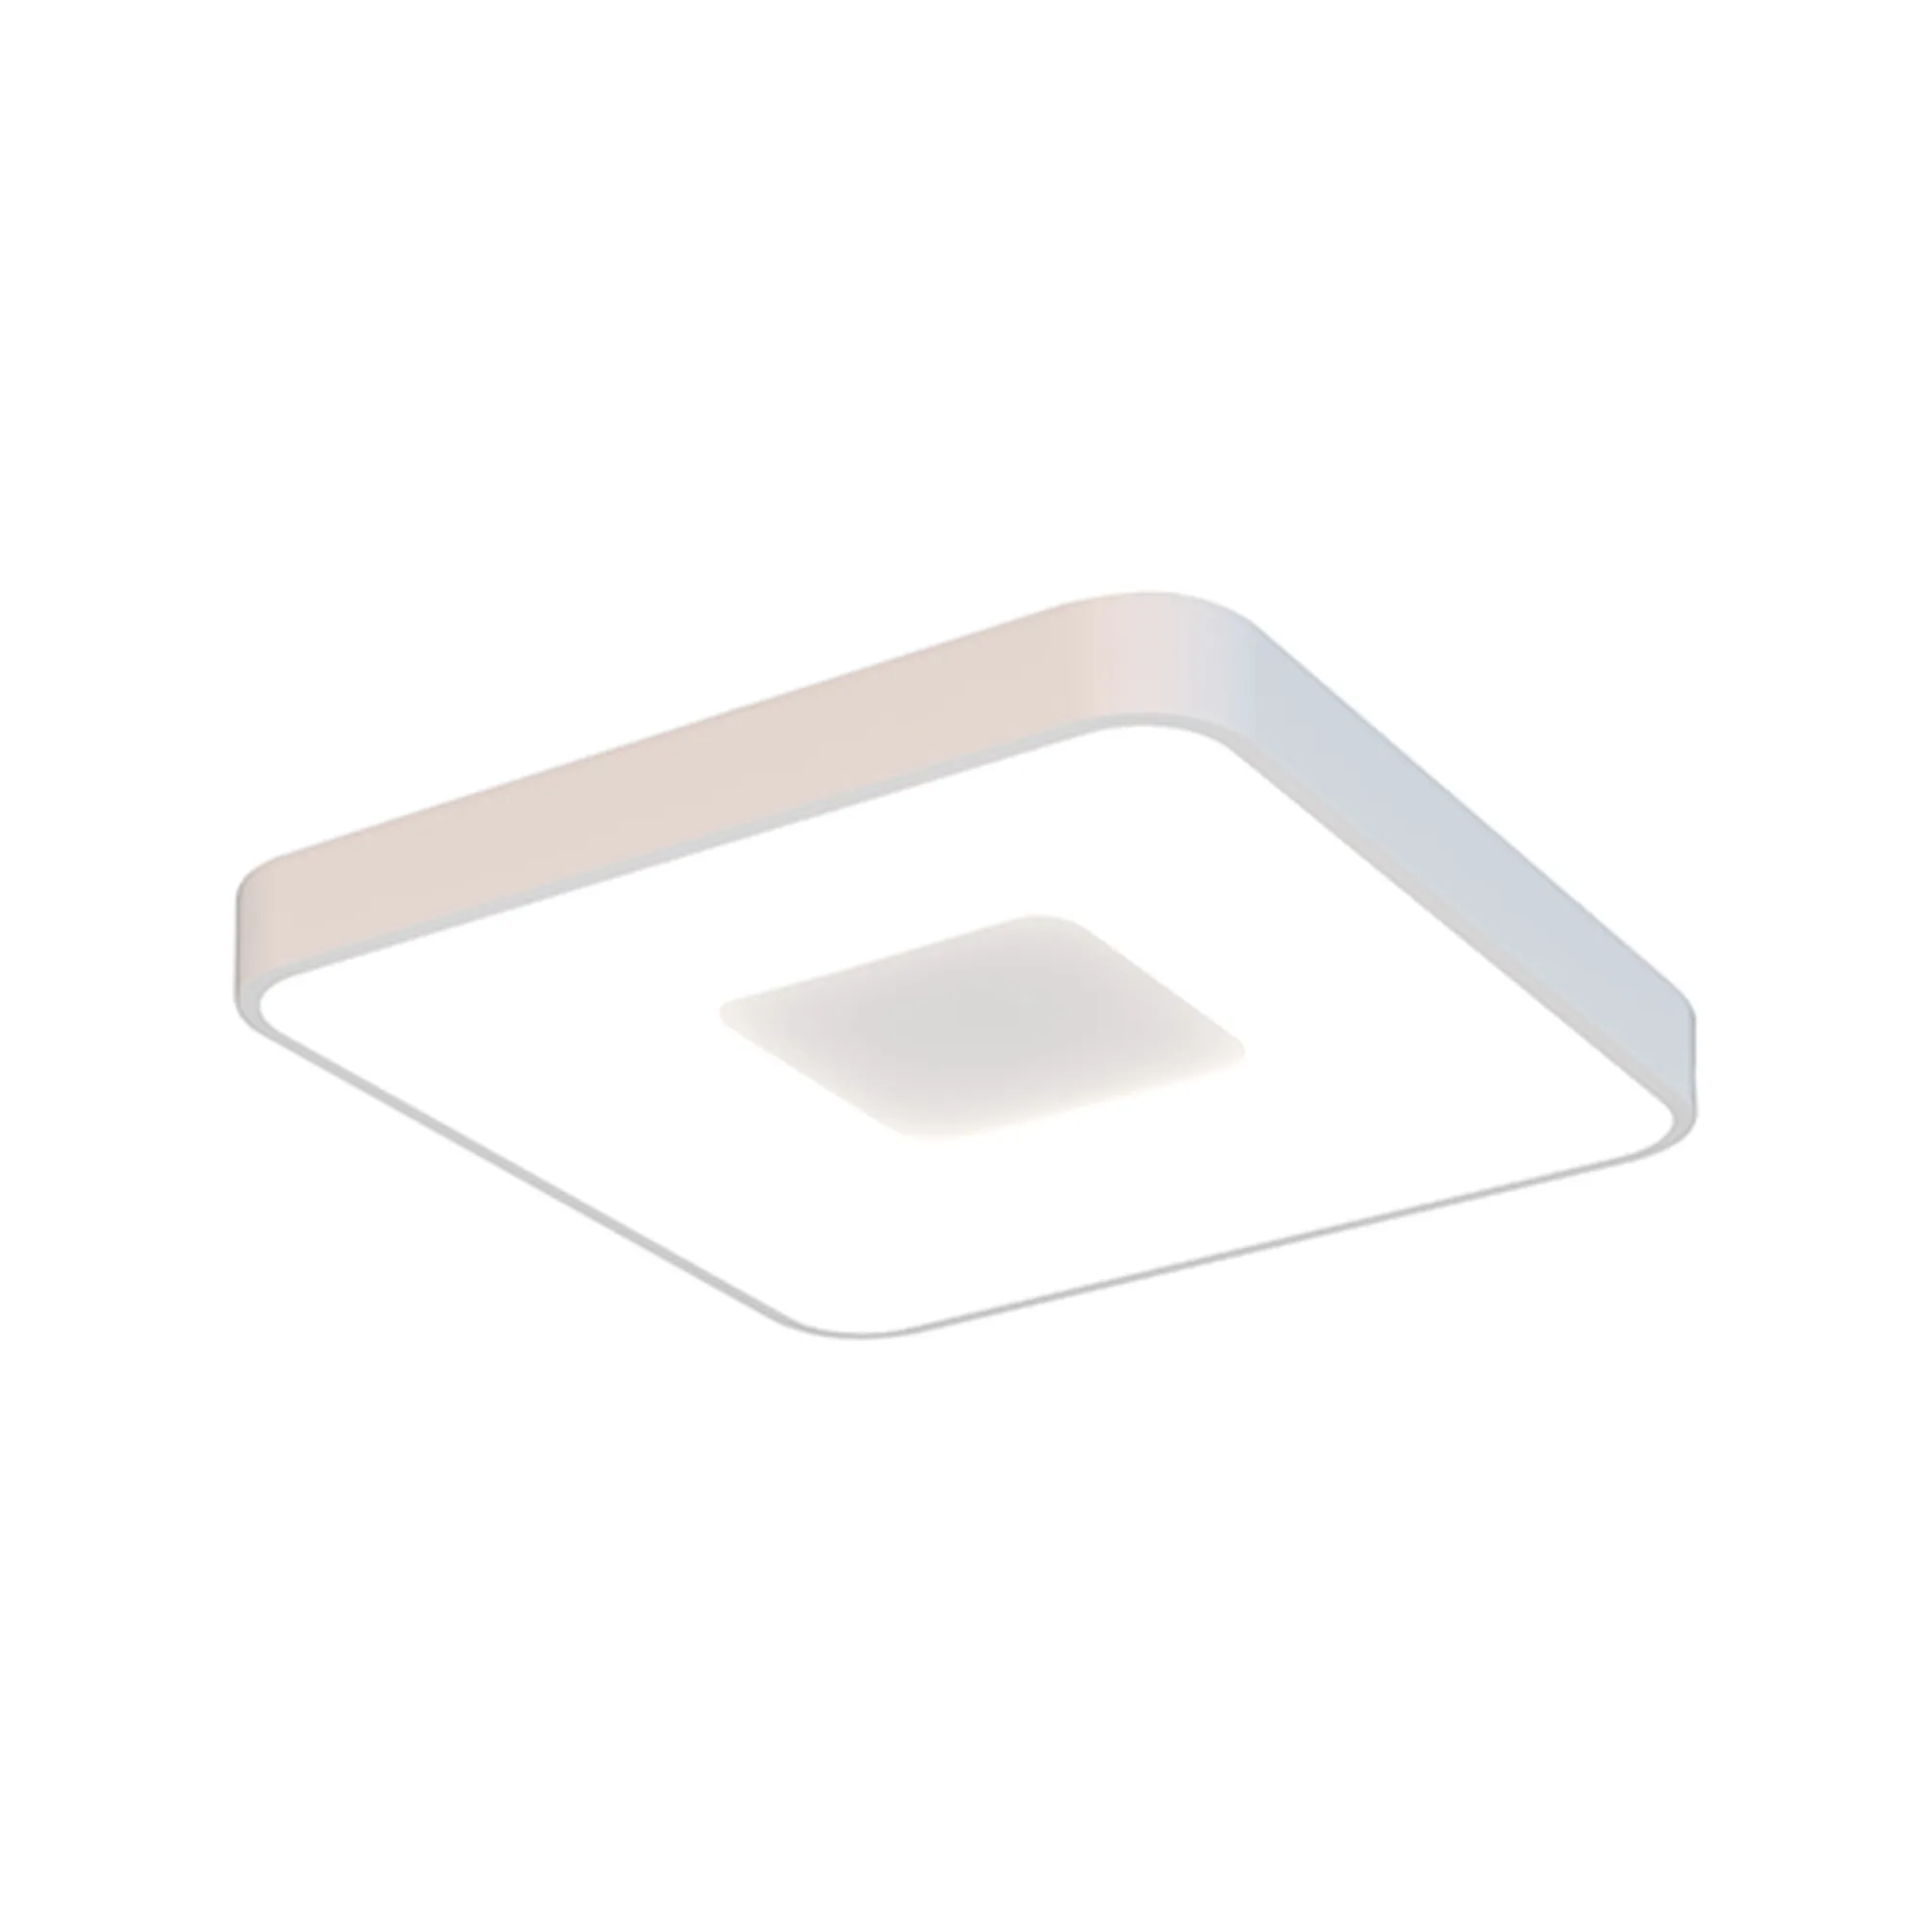 Coin Square Ceiling Lights Mantra Flush Fittings